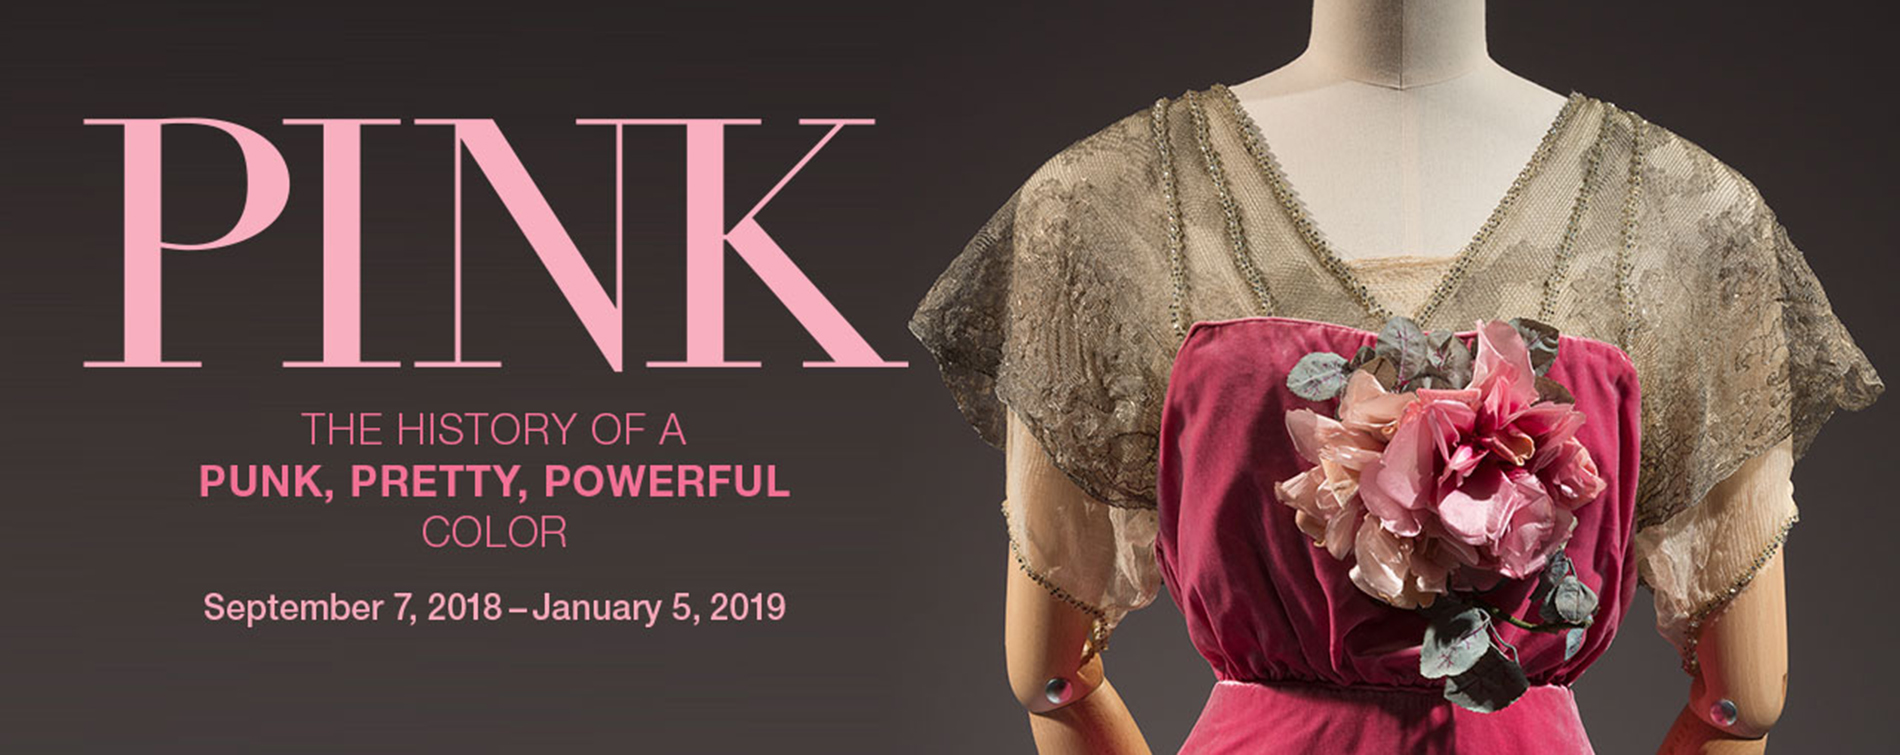 PInk, The history of a punk, pretty, powerful color September 7, 2018 - January 5, 2019